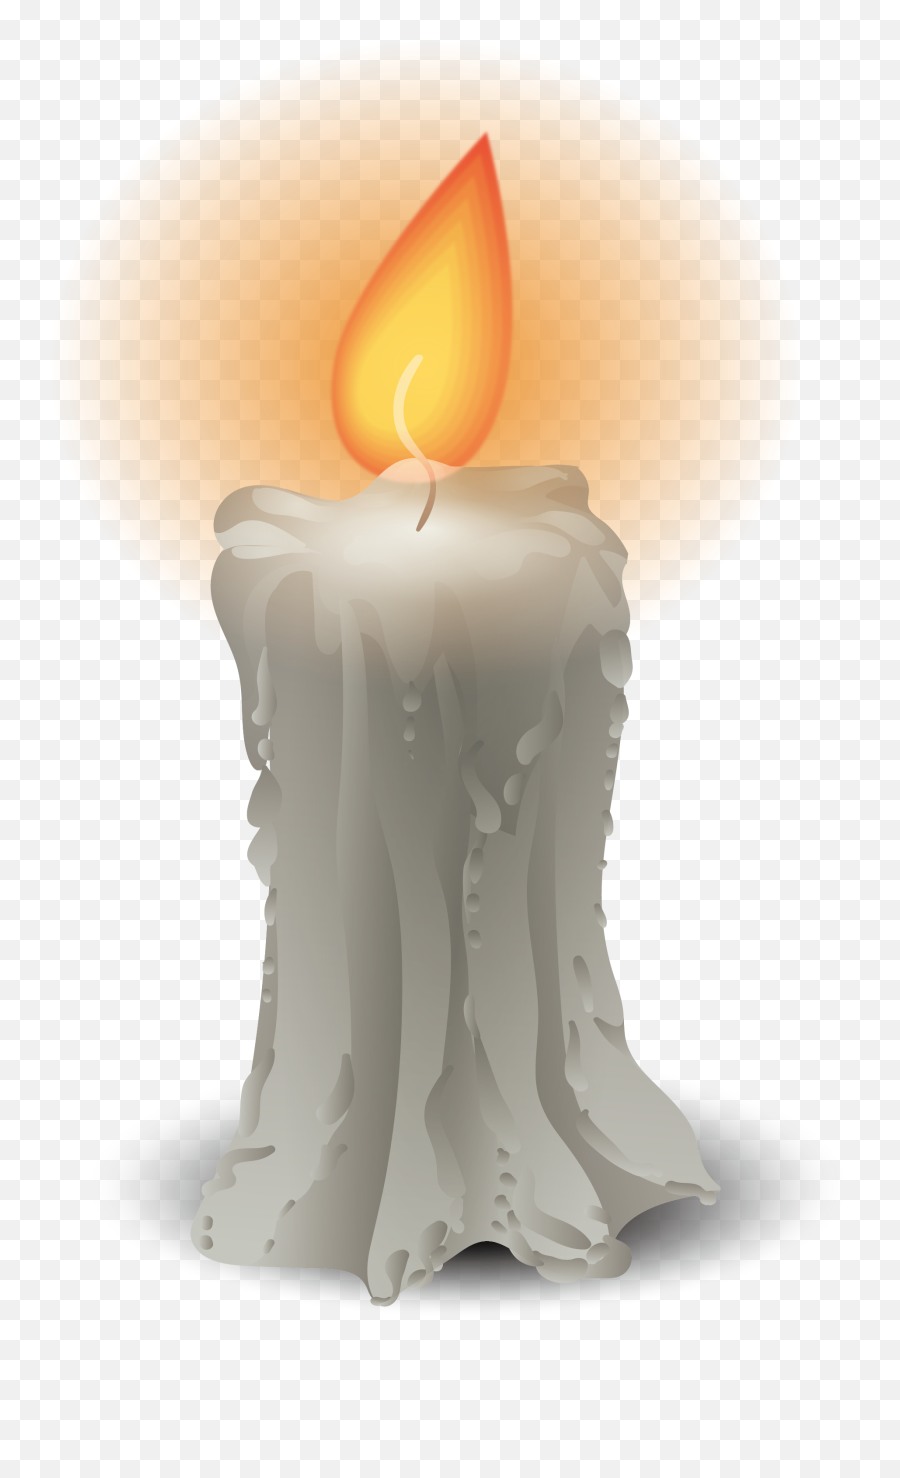 Candle Combustion Wax - Burning Candle Png Emoji,Candles Png